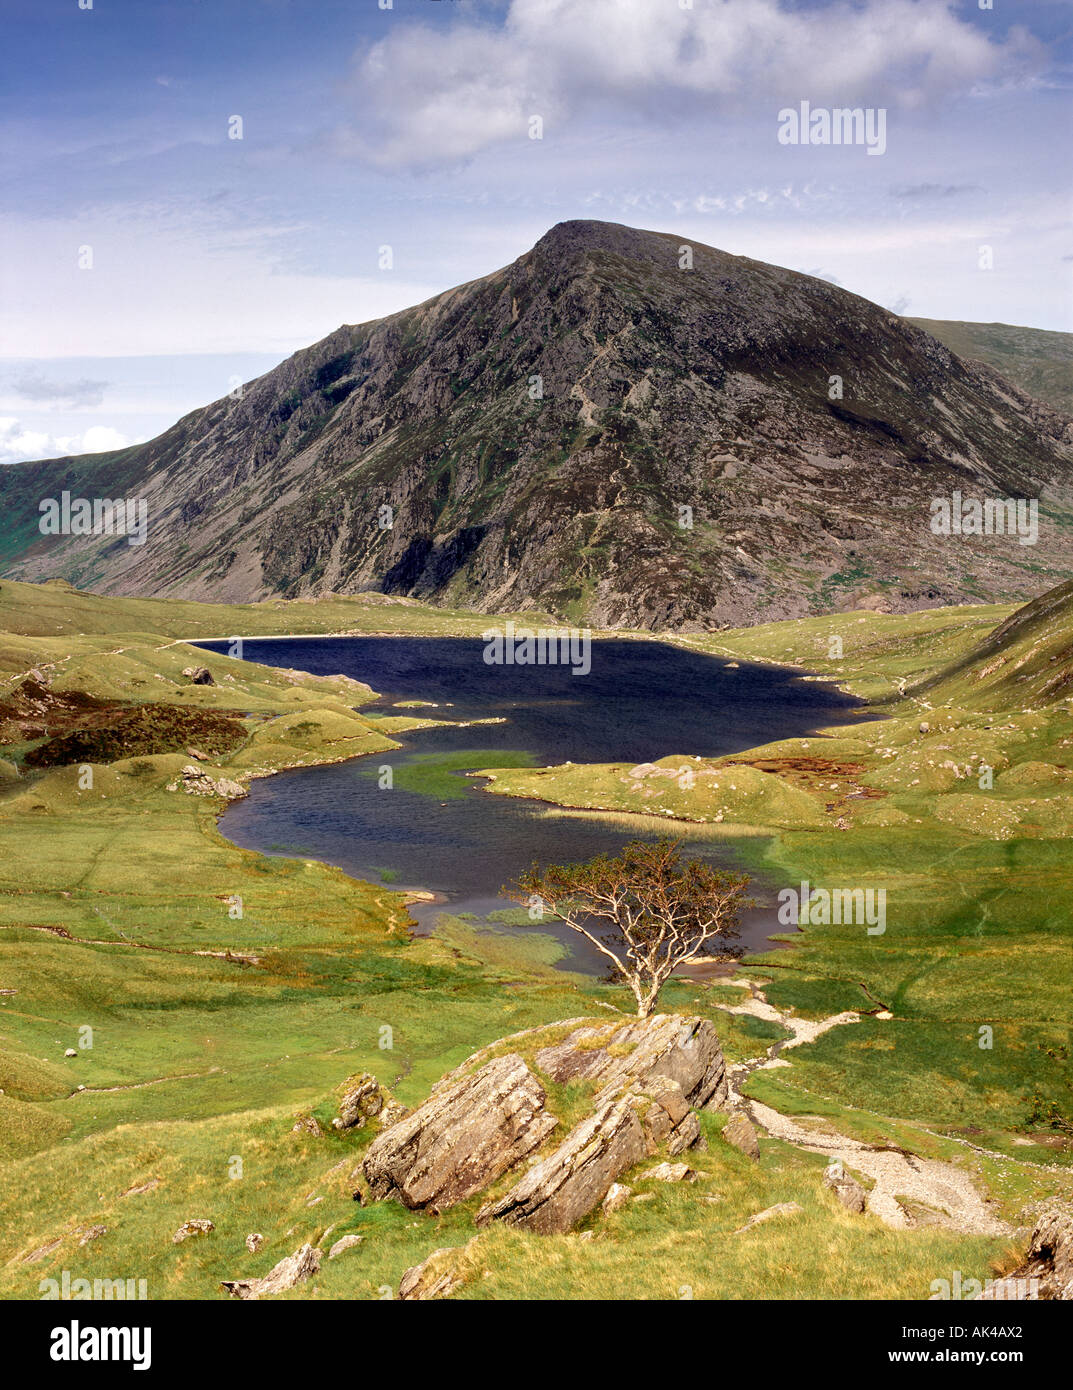 View to Pen Yr Ole Wen across Llyn Idwal, Snowdonia National Park. Wales Stock Photo